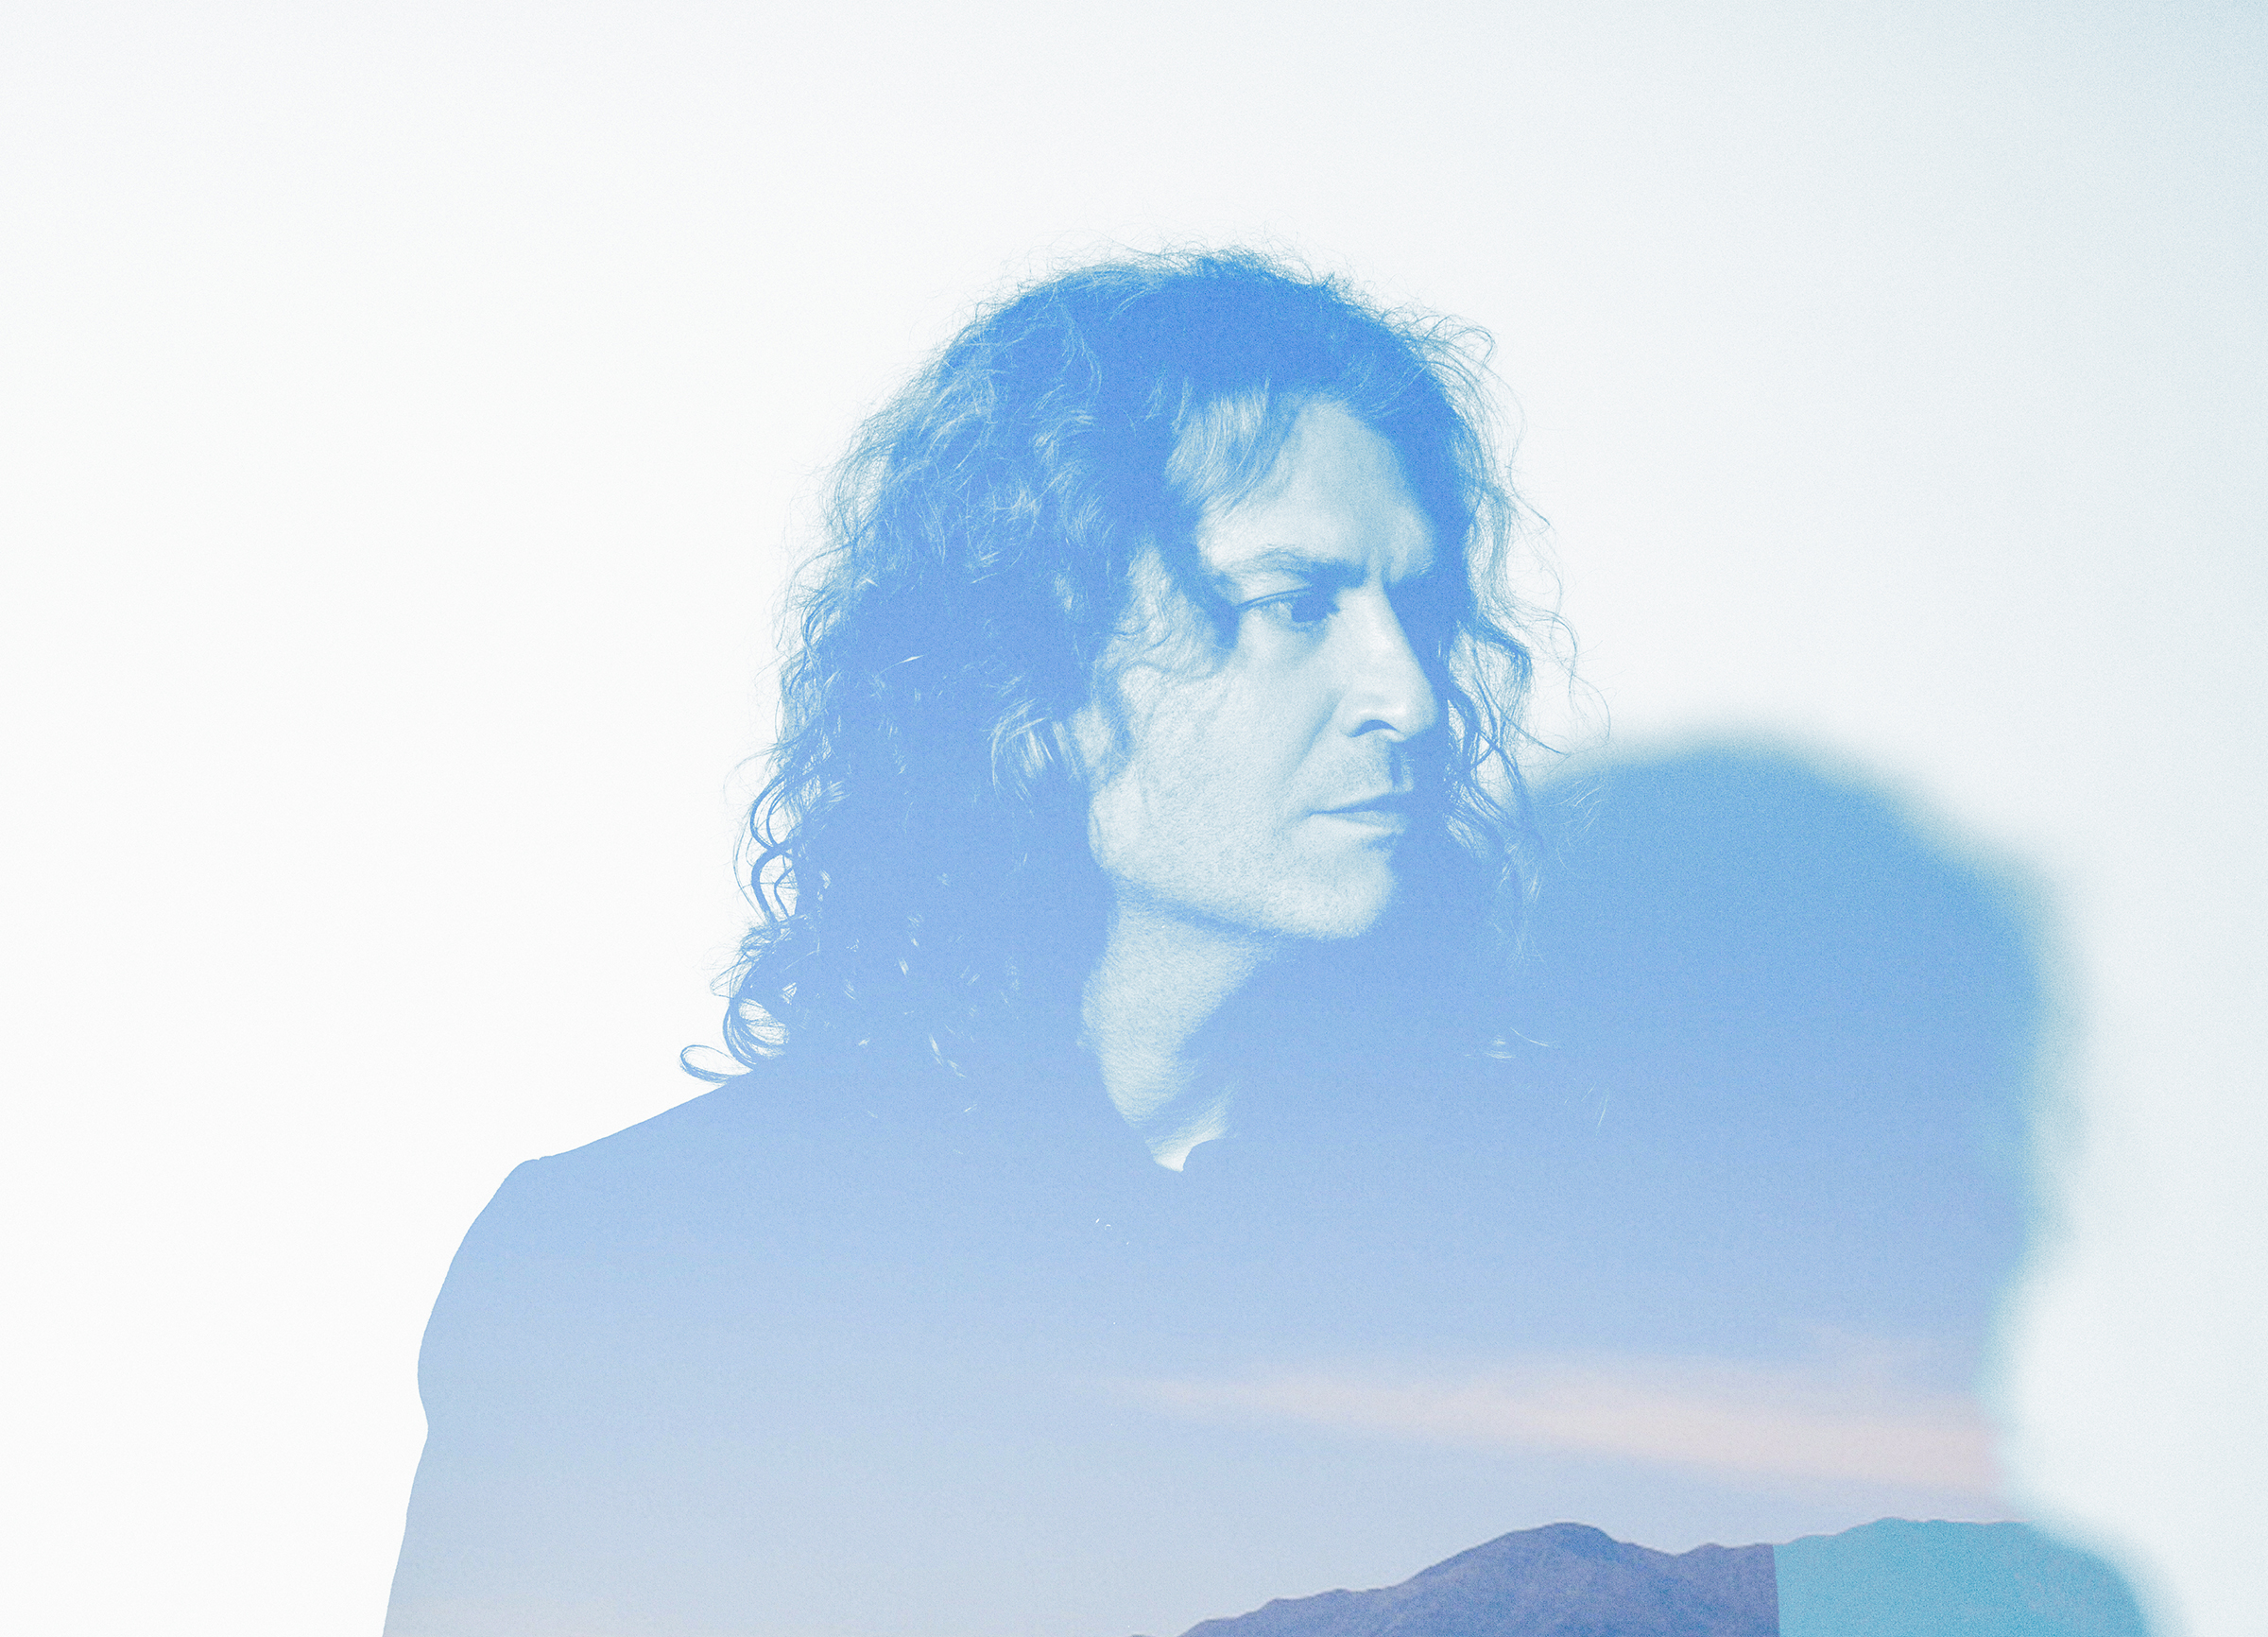 DAVE KEUNING shares the video for 'From Stardust' from his new LP 'A Mild Case of Everything' 